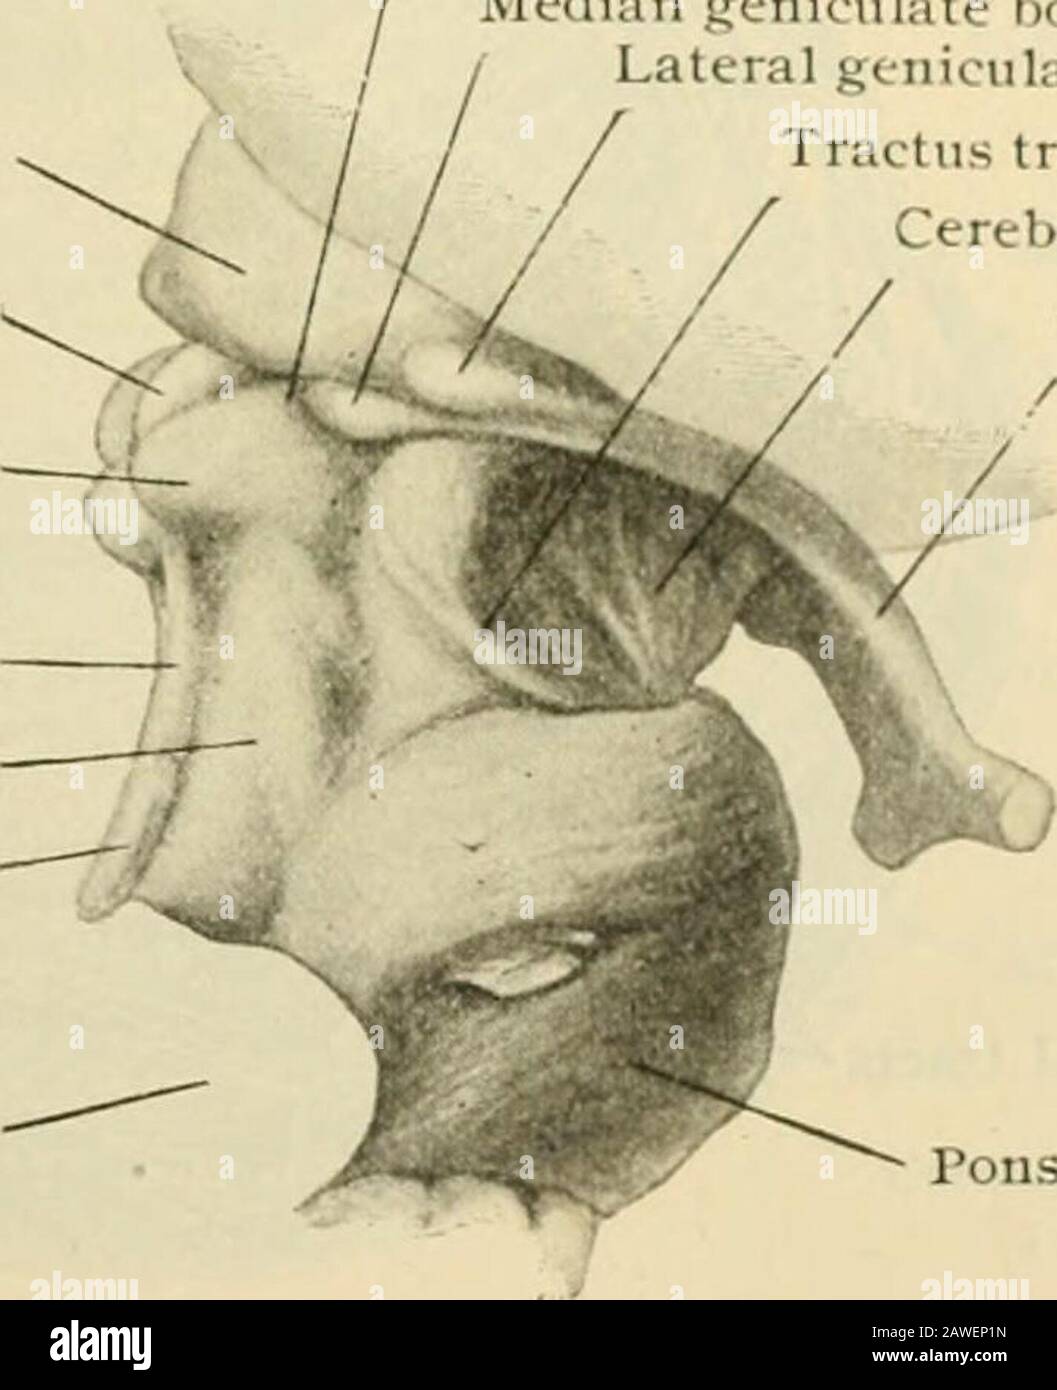 Human anatomy, including structure and development and practical considerations . hat winds over themedian border and ventral surface of the peduncle, passes upward and outward acrossthe lateral surface of the mid-brain, to be lost in the vicinity of the medial geniculatebody. The depressed triangular area included between the diverging peduncles is theinterpeduncular fossa, the lioor of which is pierced by numerous minute openingsthat transmit small blood-vessels, and hence is known as the posterior perforatedsubstance. The blunted inferior angle of the fossa, immediately above the pons,corre Stock Photo